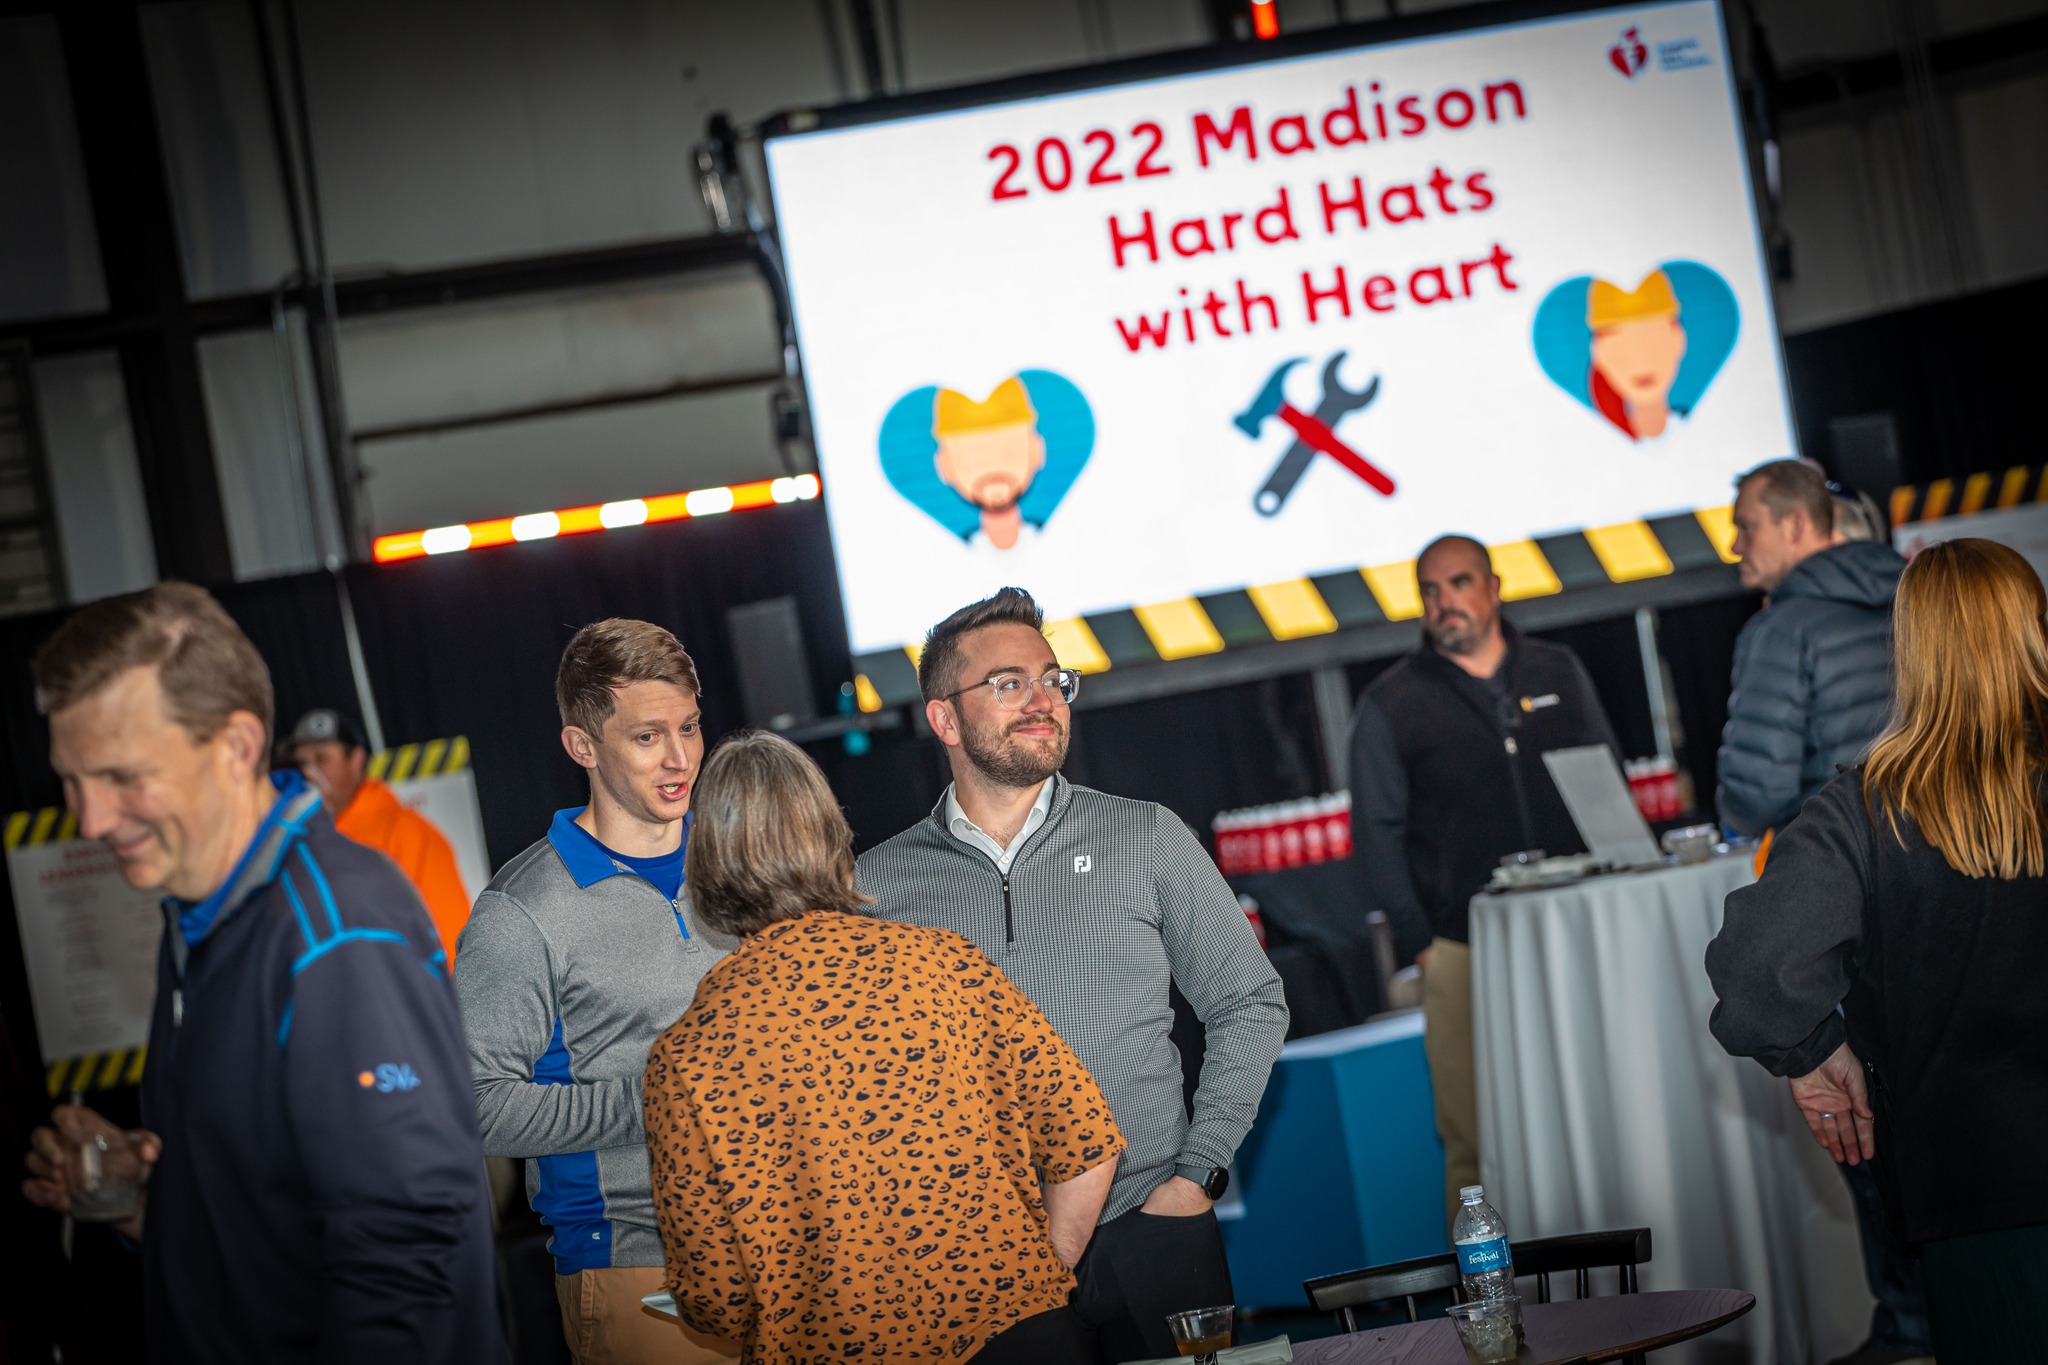 Picture of people standing in front of 2022 Madison Hard Hats with Heart sign